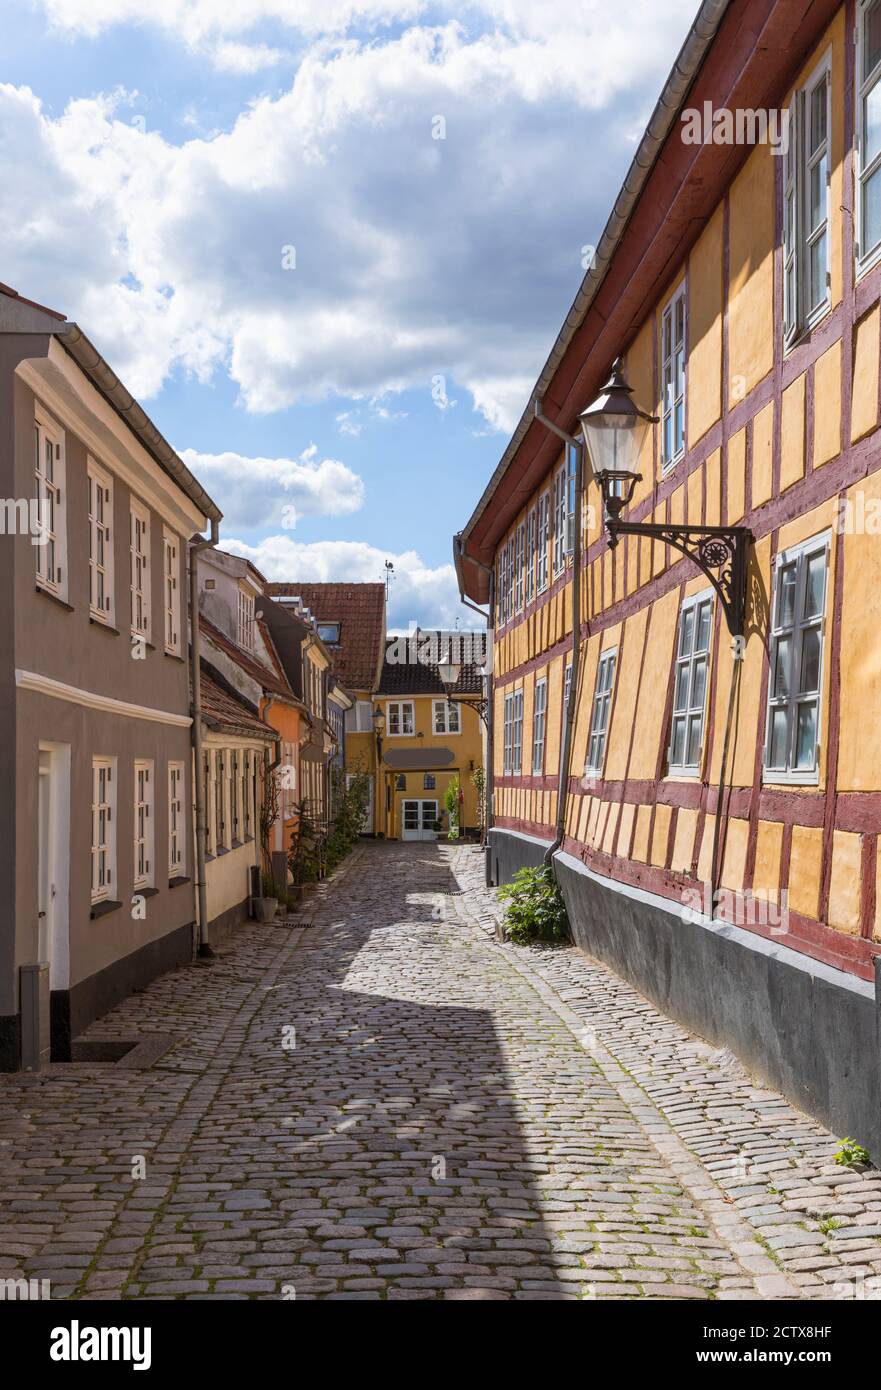 Colorful slanted houses on cobbled medieval street at the old town of Aalborg, Denmark Stock Photo